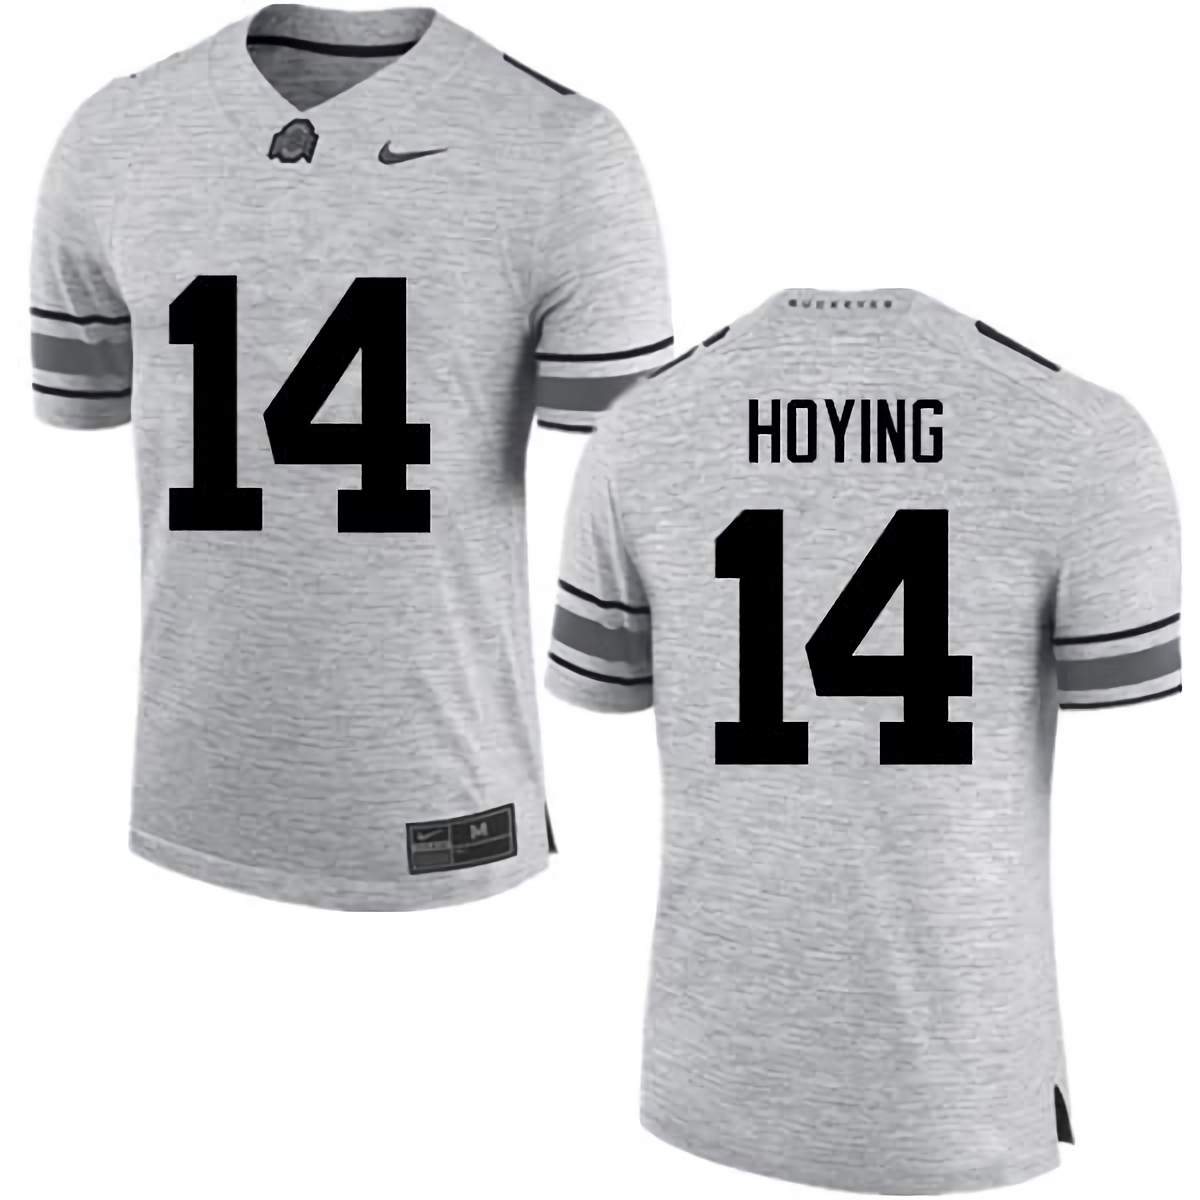 Bobby Hoying Ohio State Buckeyes Men's NCAA #14 Nike Gray College Stitched Football Jersey EHV2556OD